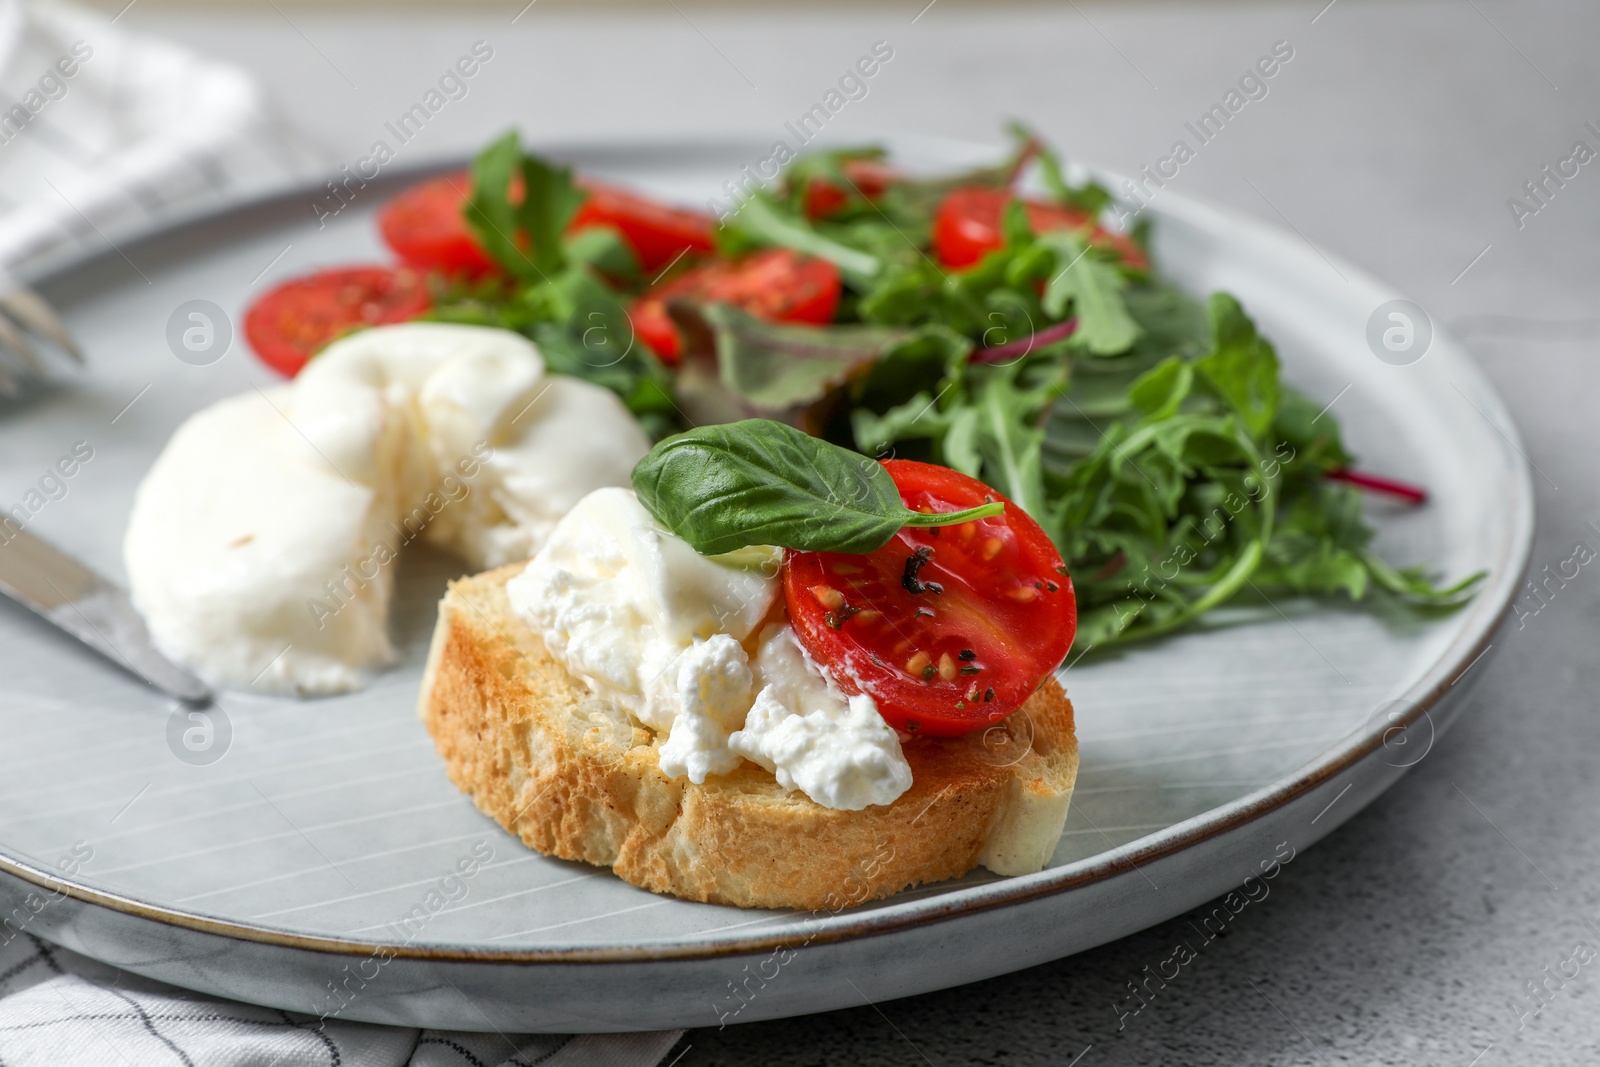 Photo of Delicious burrata cheese with tomatoes, arugula and toast on grey table, closeup